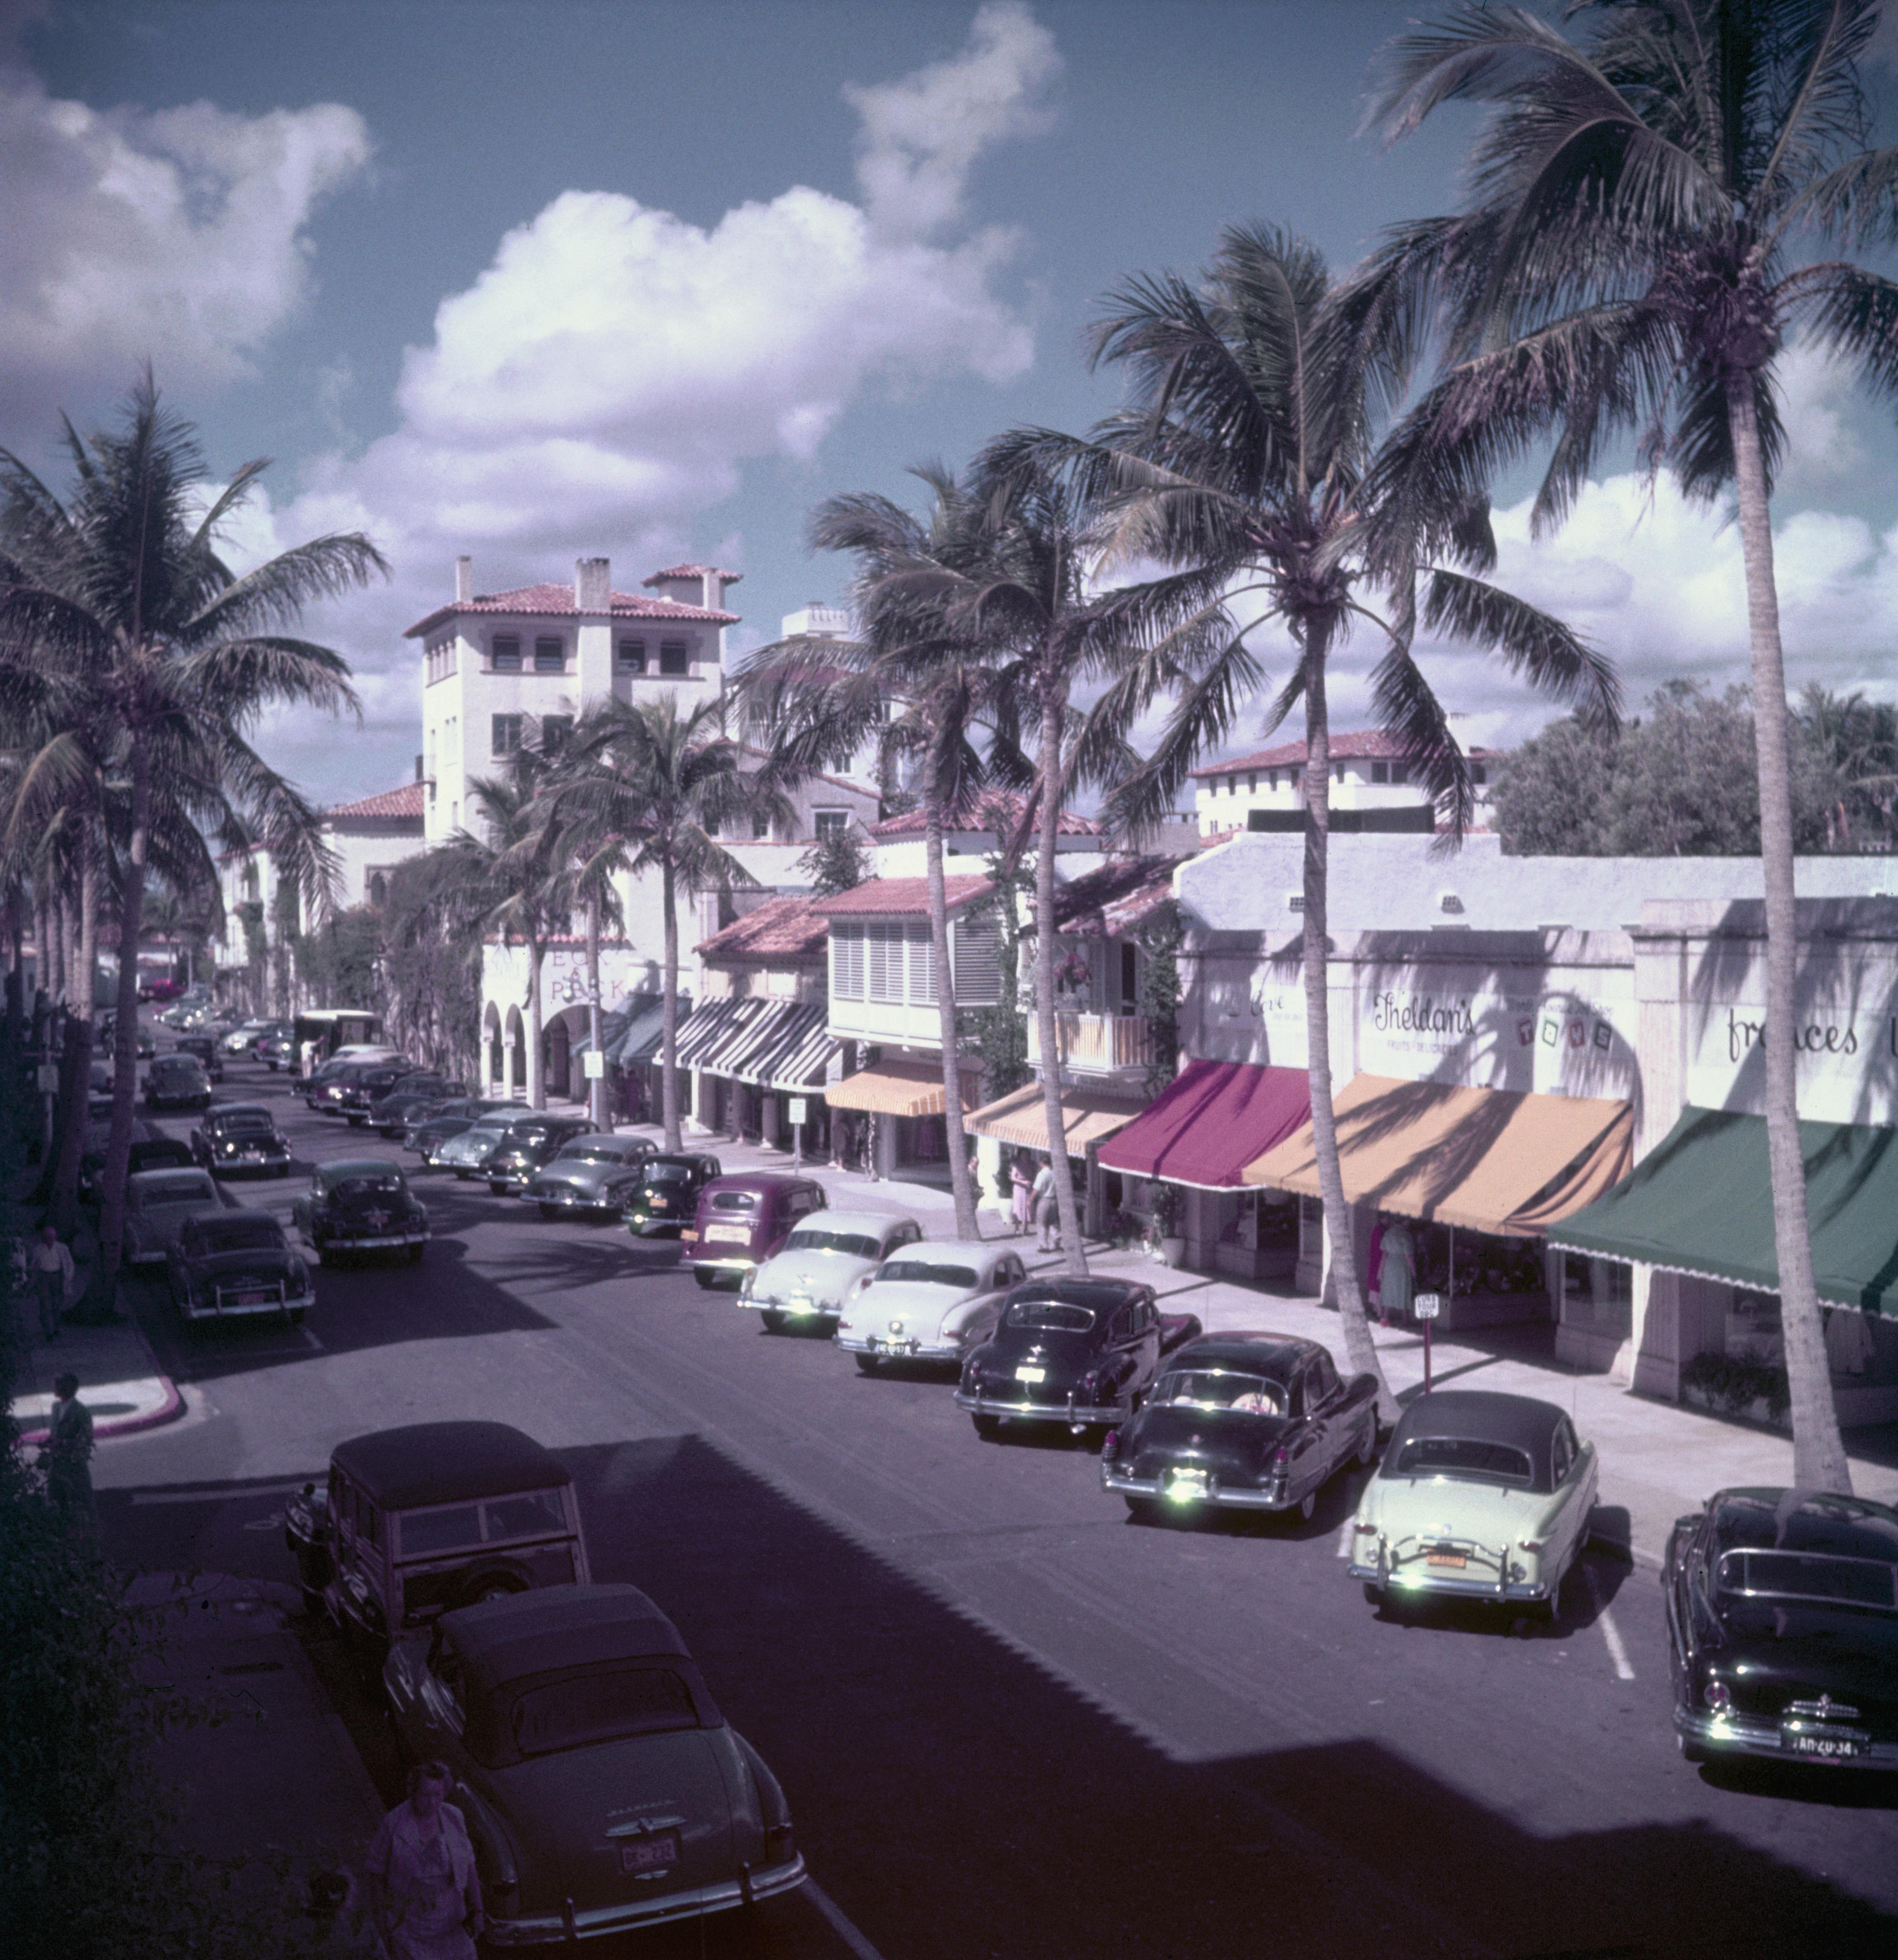 'Palm Beach Street' 1953 Slim Aarons Limited Estate Edition

Cars parked on a tree-lined street in Palm Beach, Florida, circa 1953. (Photo by Slim Aarons)

C Print
Produced from the original transparency
Certificate of authenticity supplied 
THIS